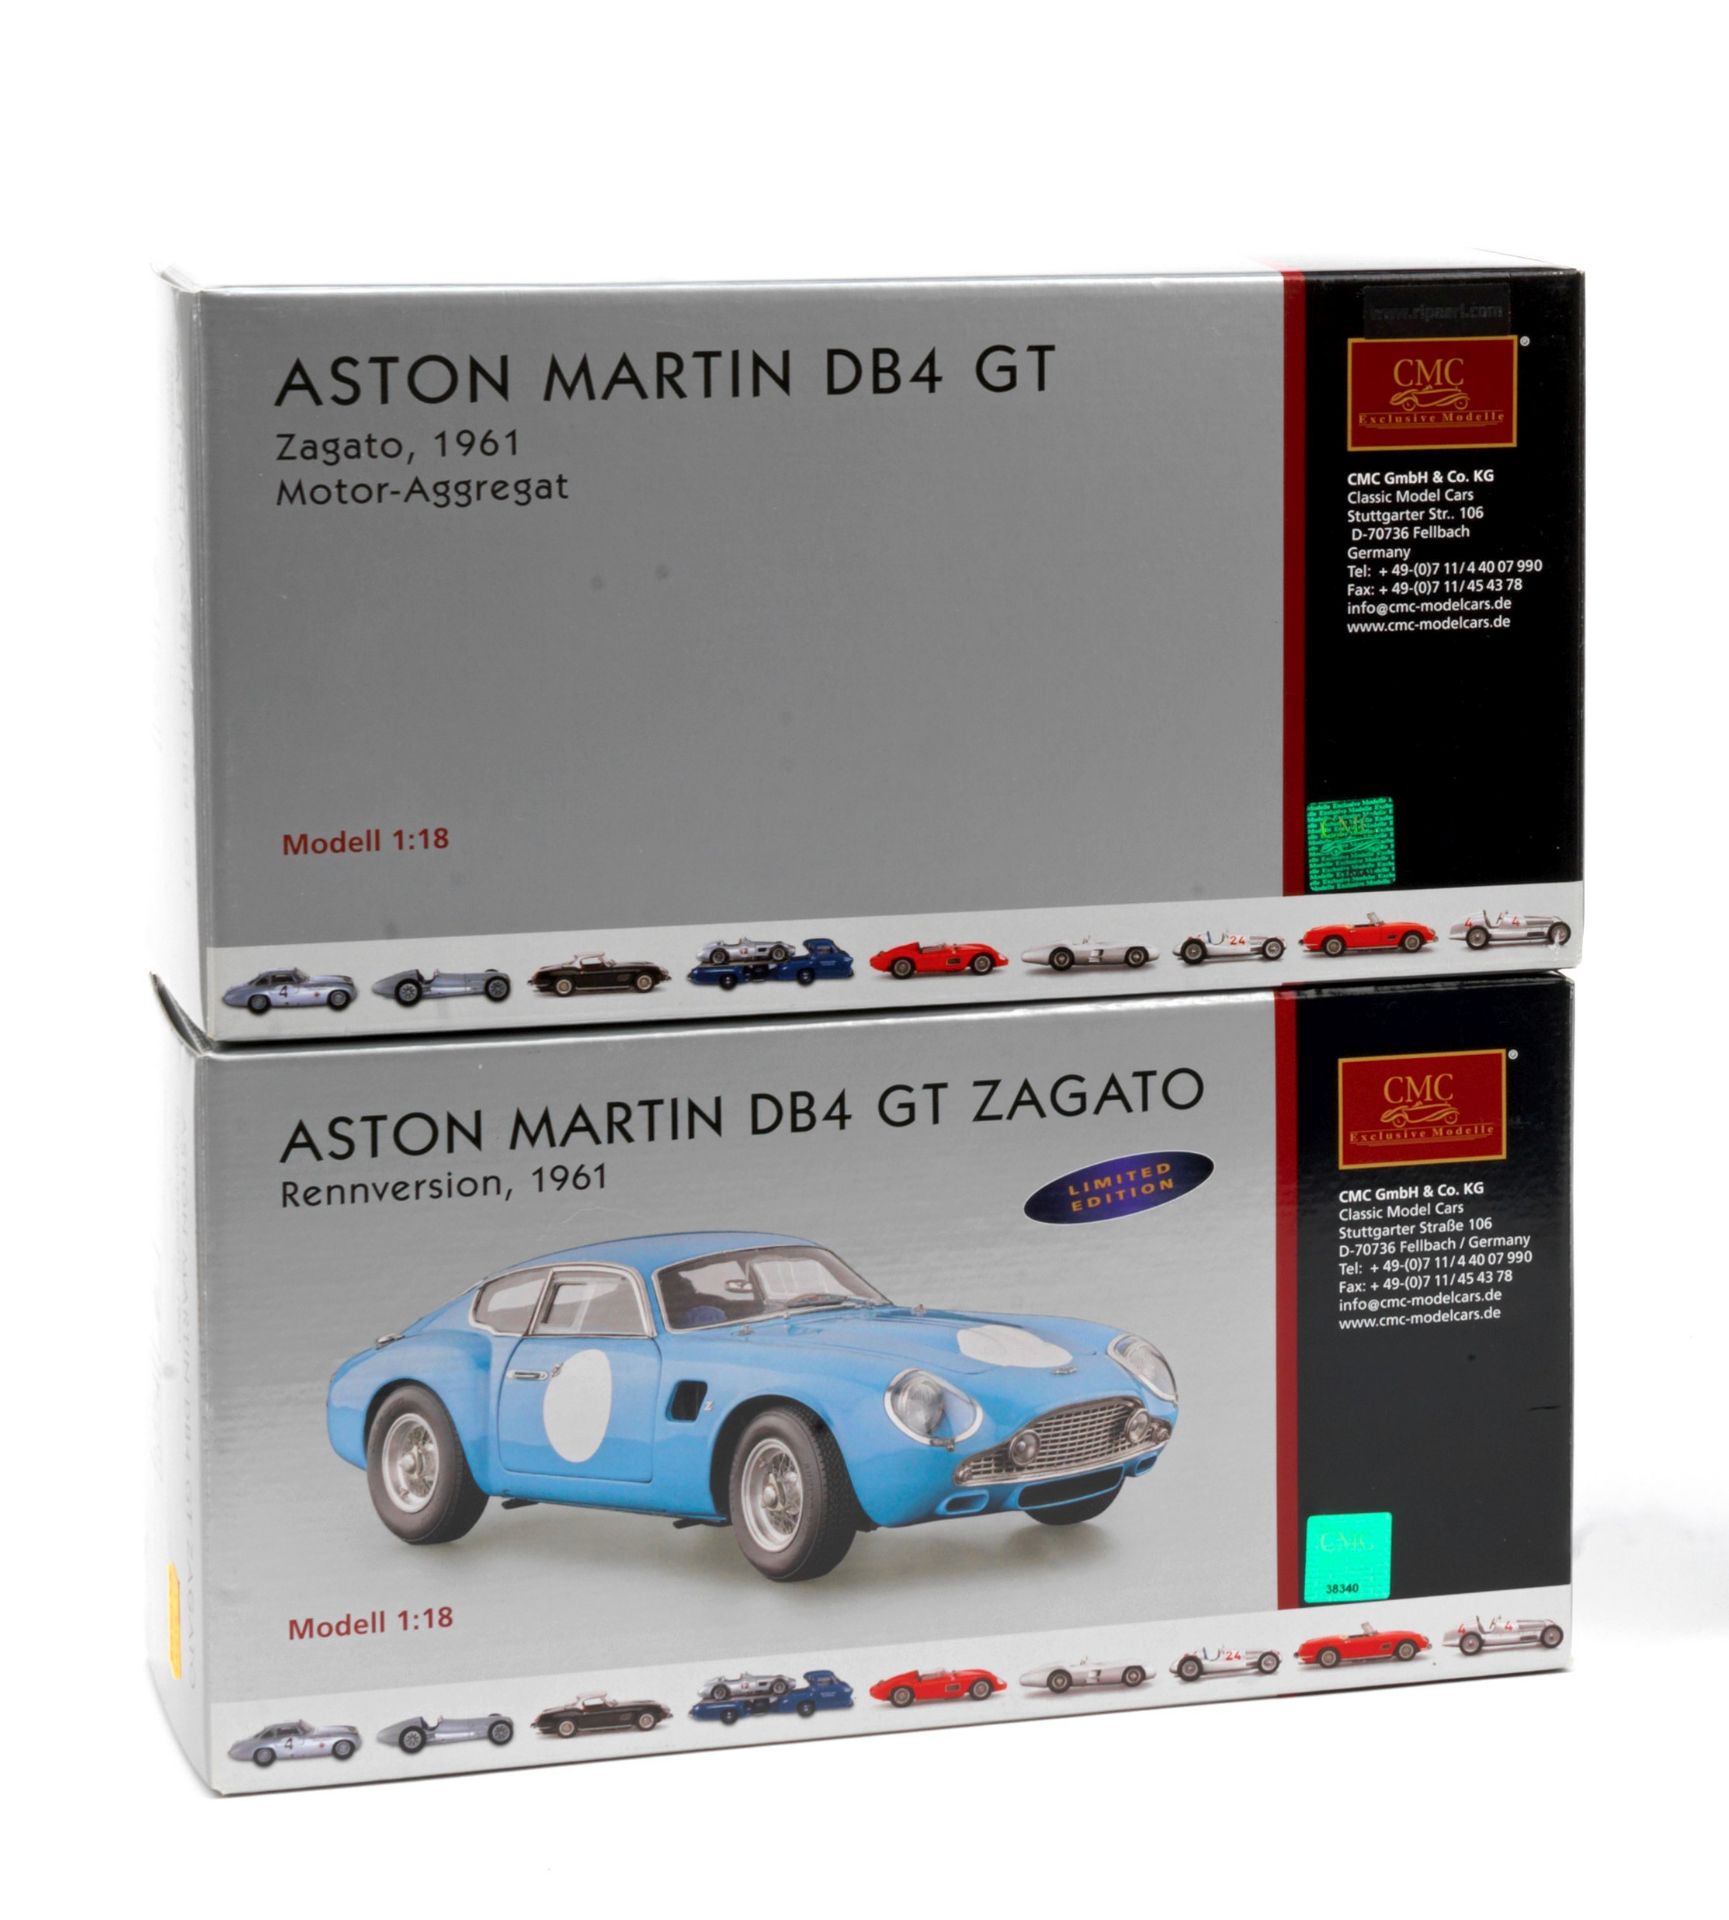 Two boxed 1:18 scale models of a 1961 Aston Martin DB4 GT Zagato and engine, by CMC Models of Ger...